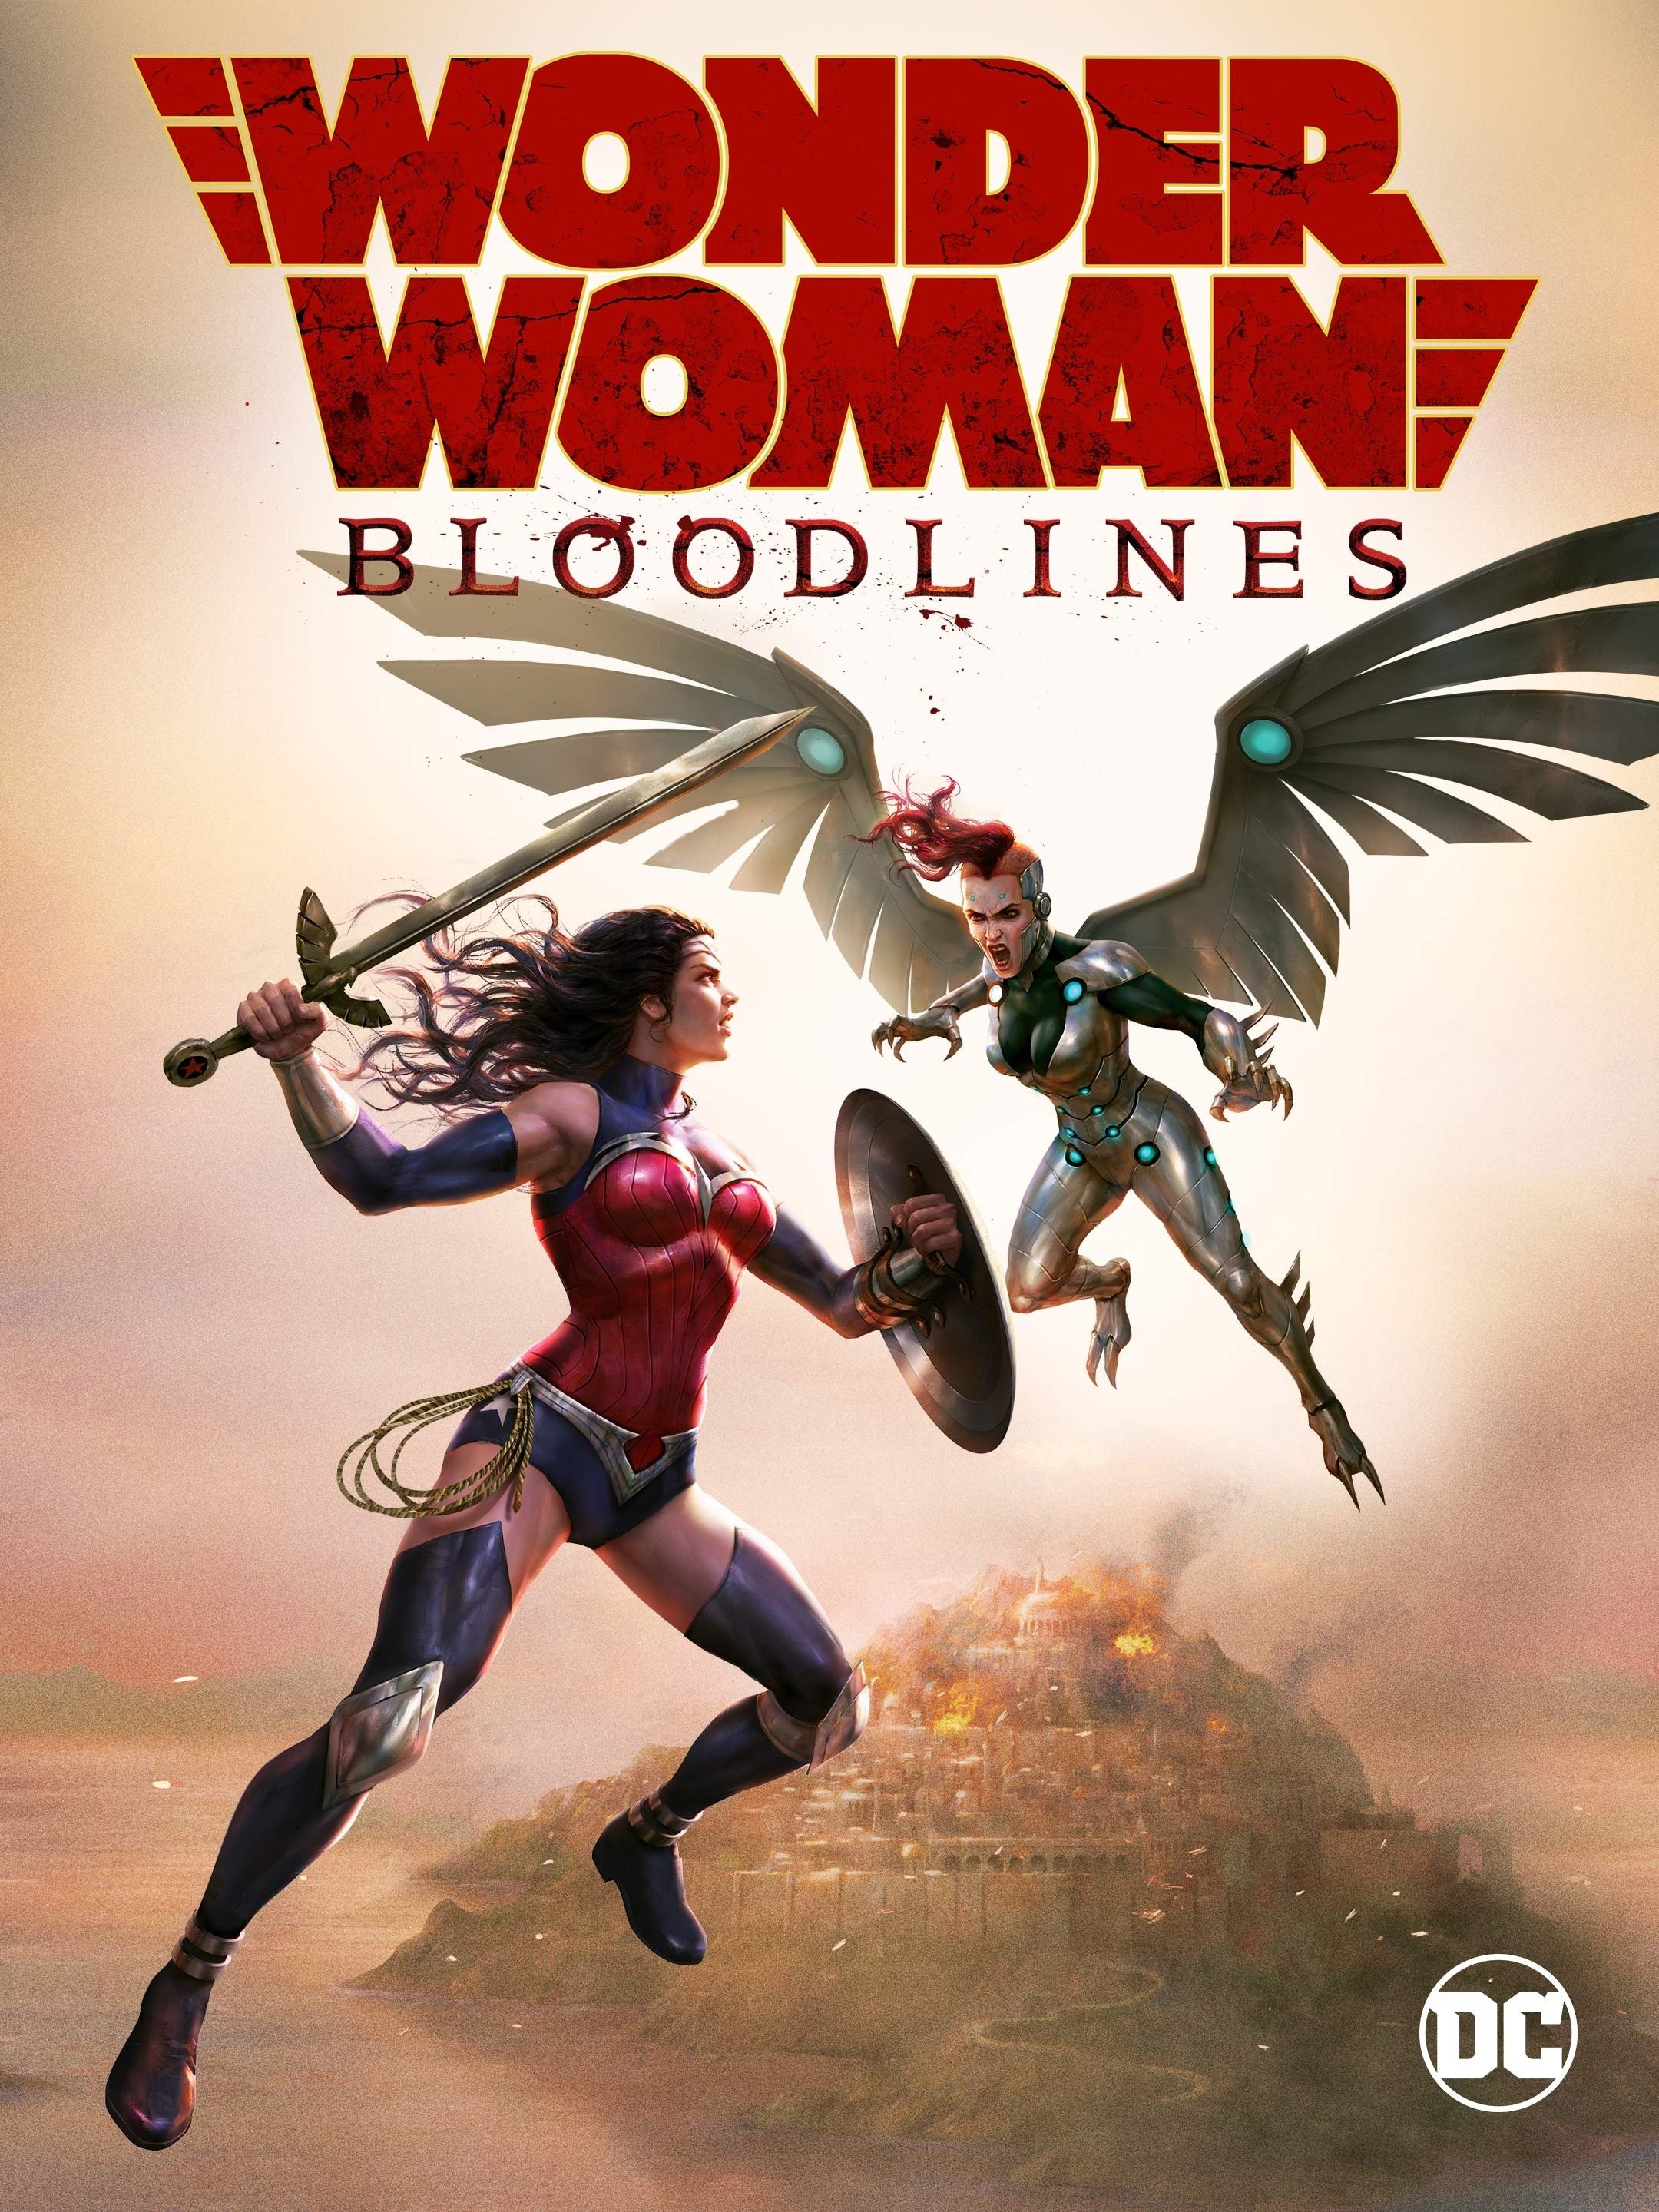 The Infallible Fish Reviews: Wonder Woman Bloodlines